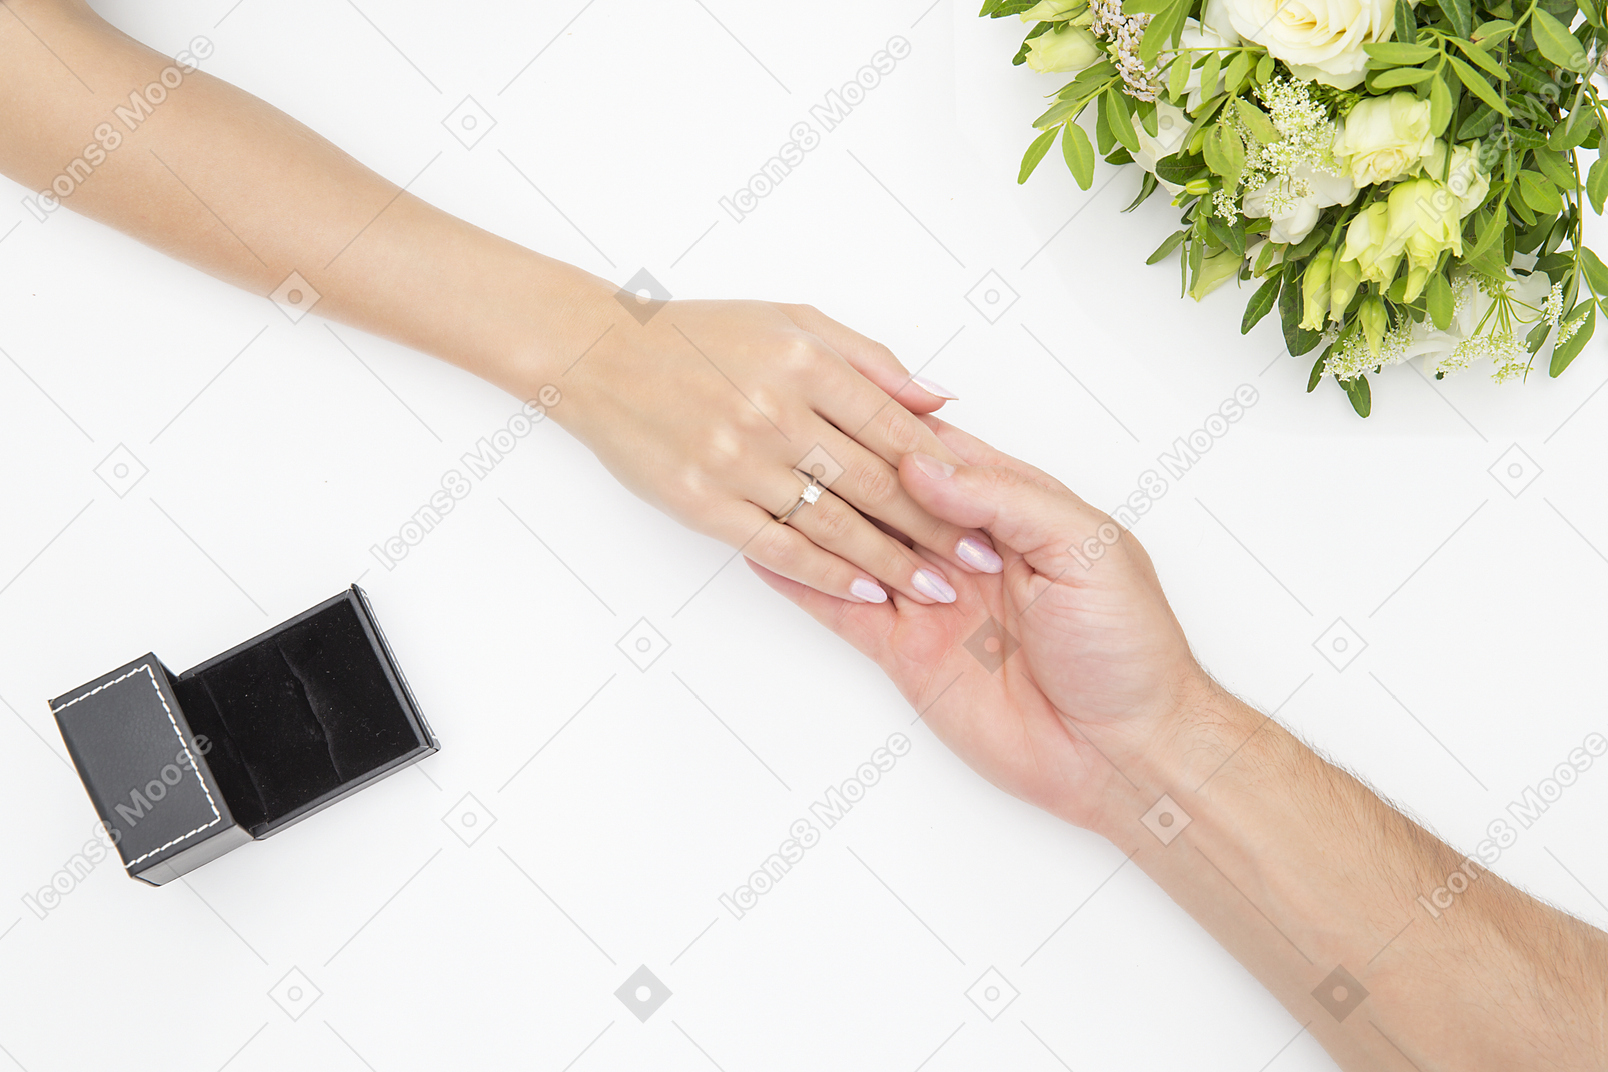 Male hand holding female hand with ring on it